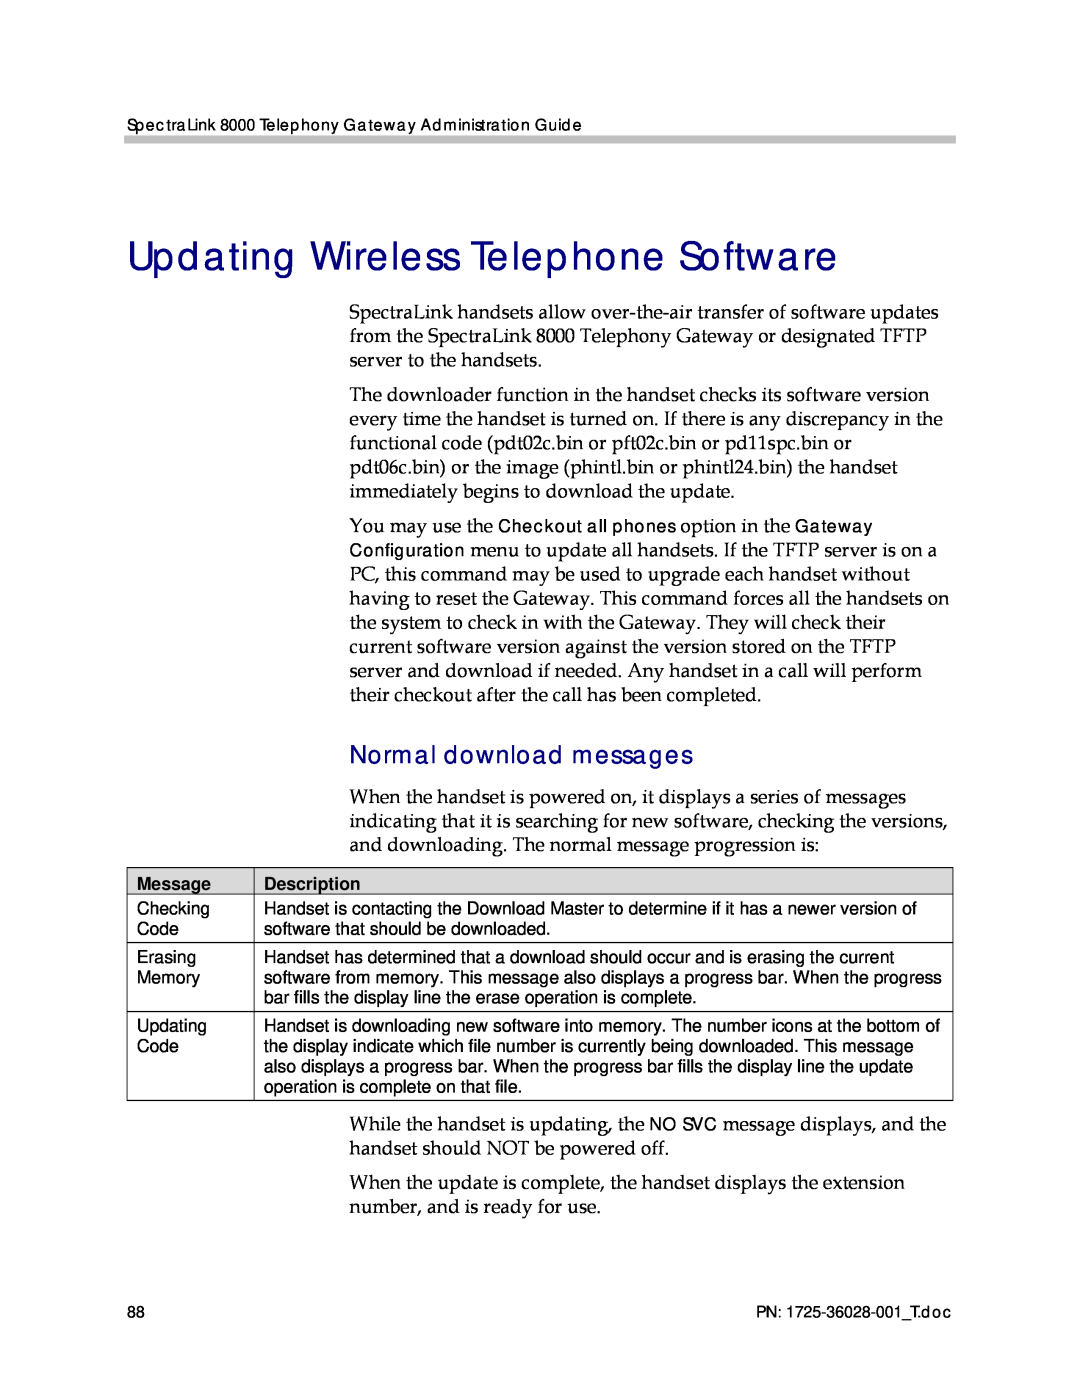 Polycom 1725-36028-001 manual Updating Wireless Telephone Software, Normal download messages 